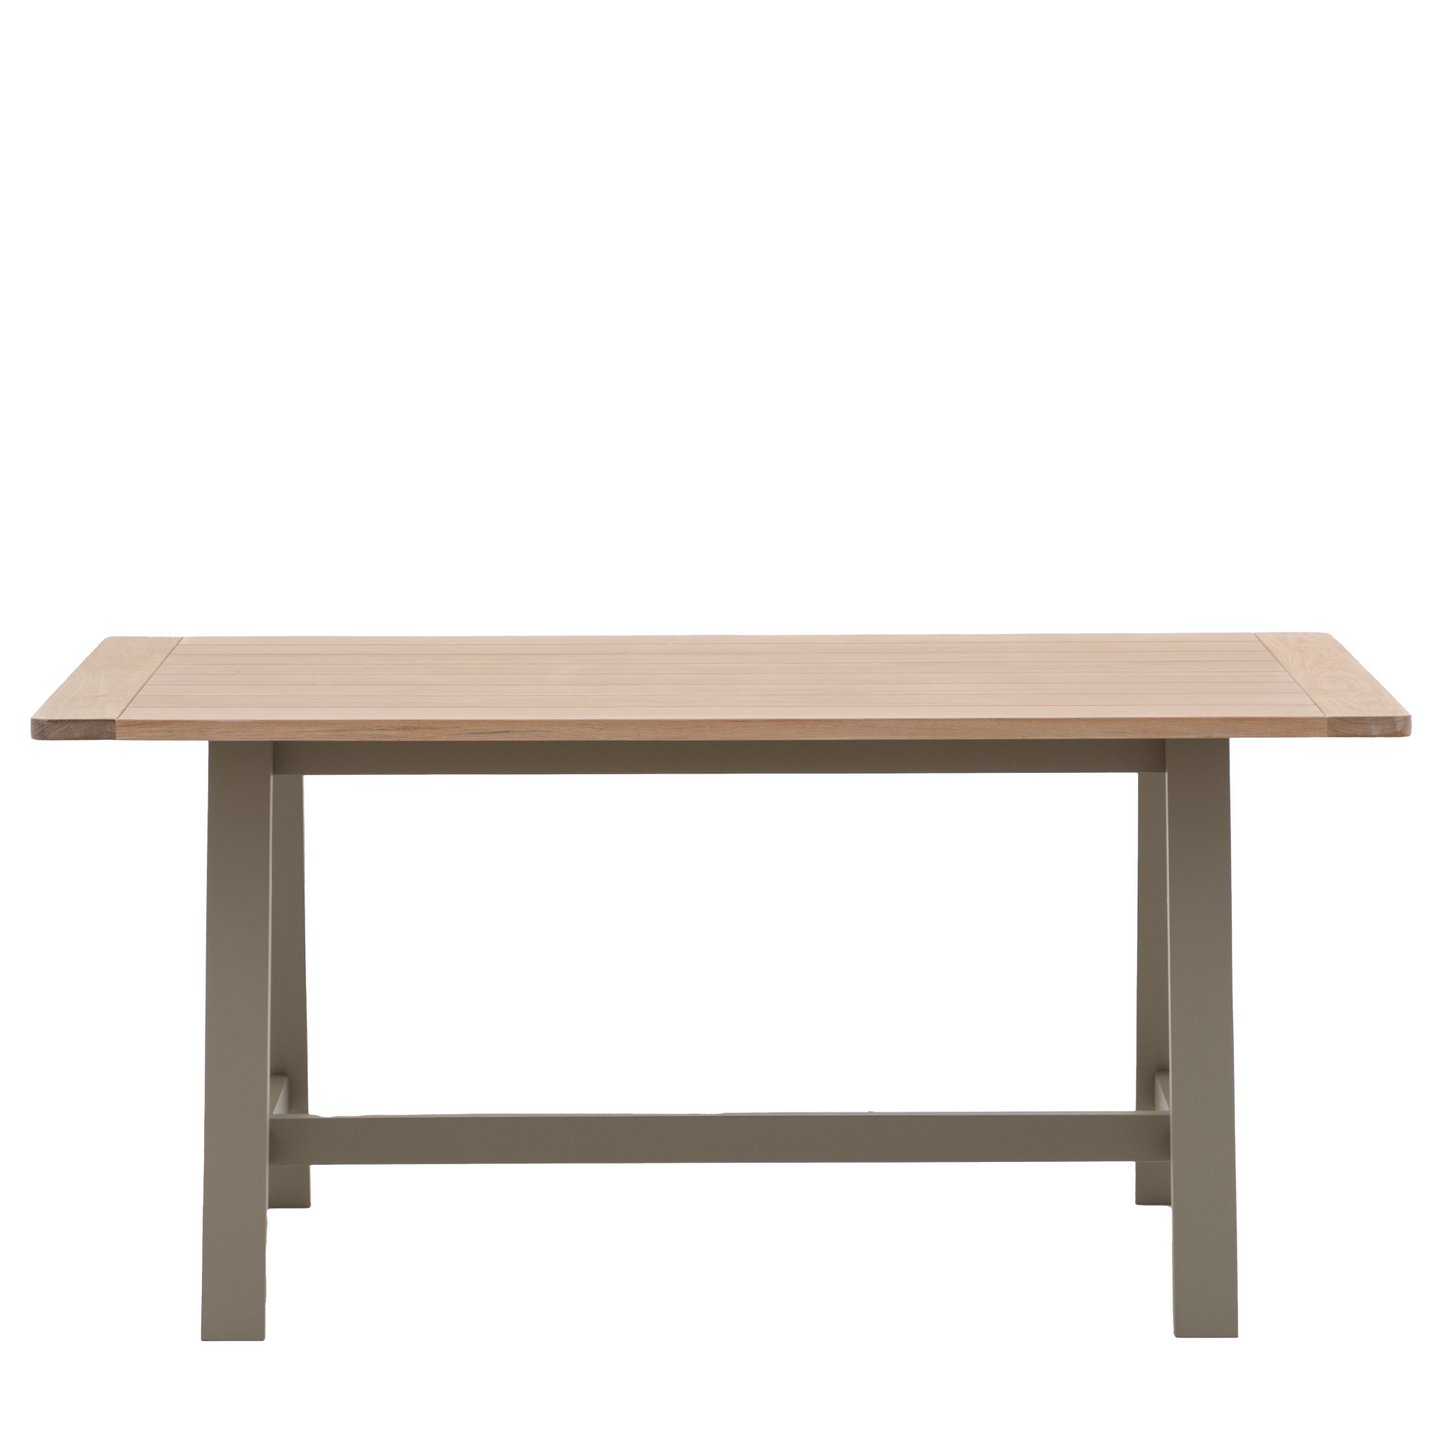 A rectangular Buckland Trestle Table in Prairie with wooden top and grey legs, perfect for interior decor and home furniture.